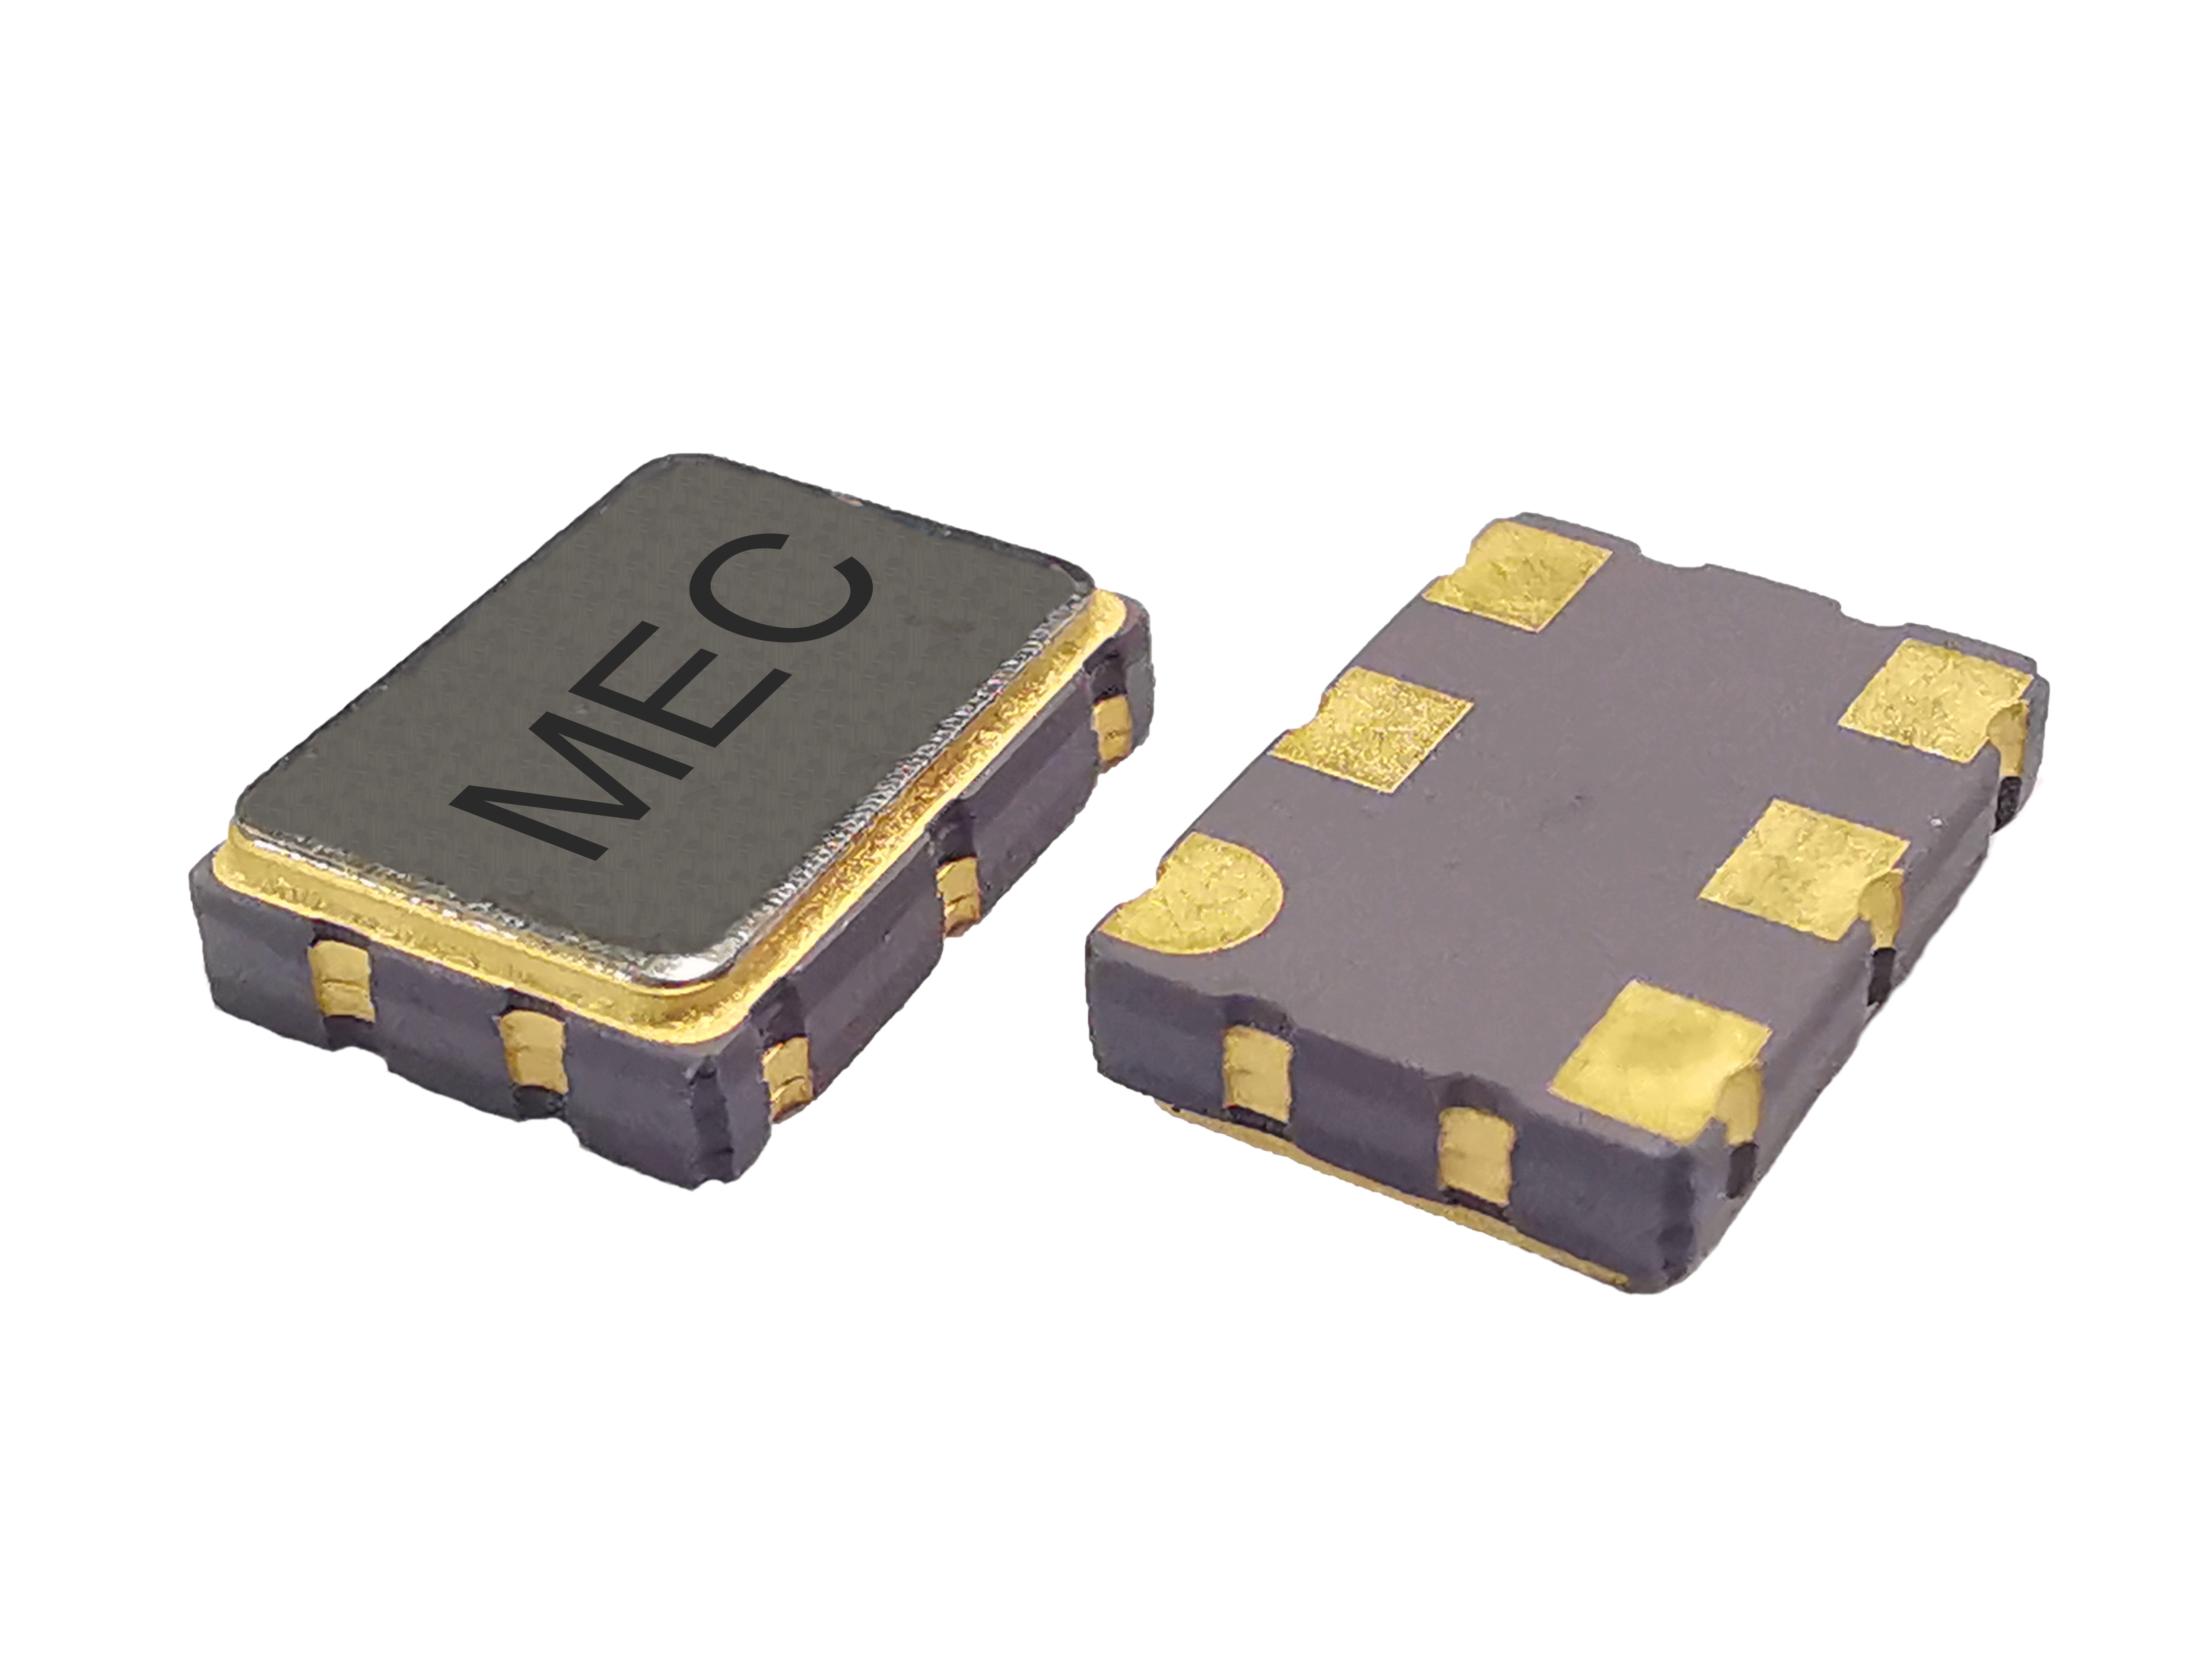 HPEK576 7050 3.3V Superb Phase Noise Differential With No PLL LVPECL SMD Crystal Oscillator